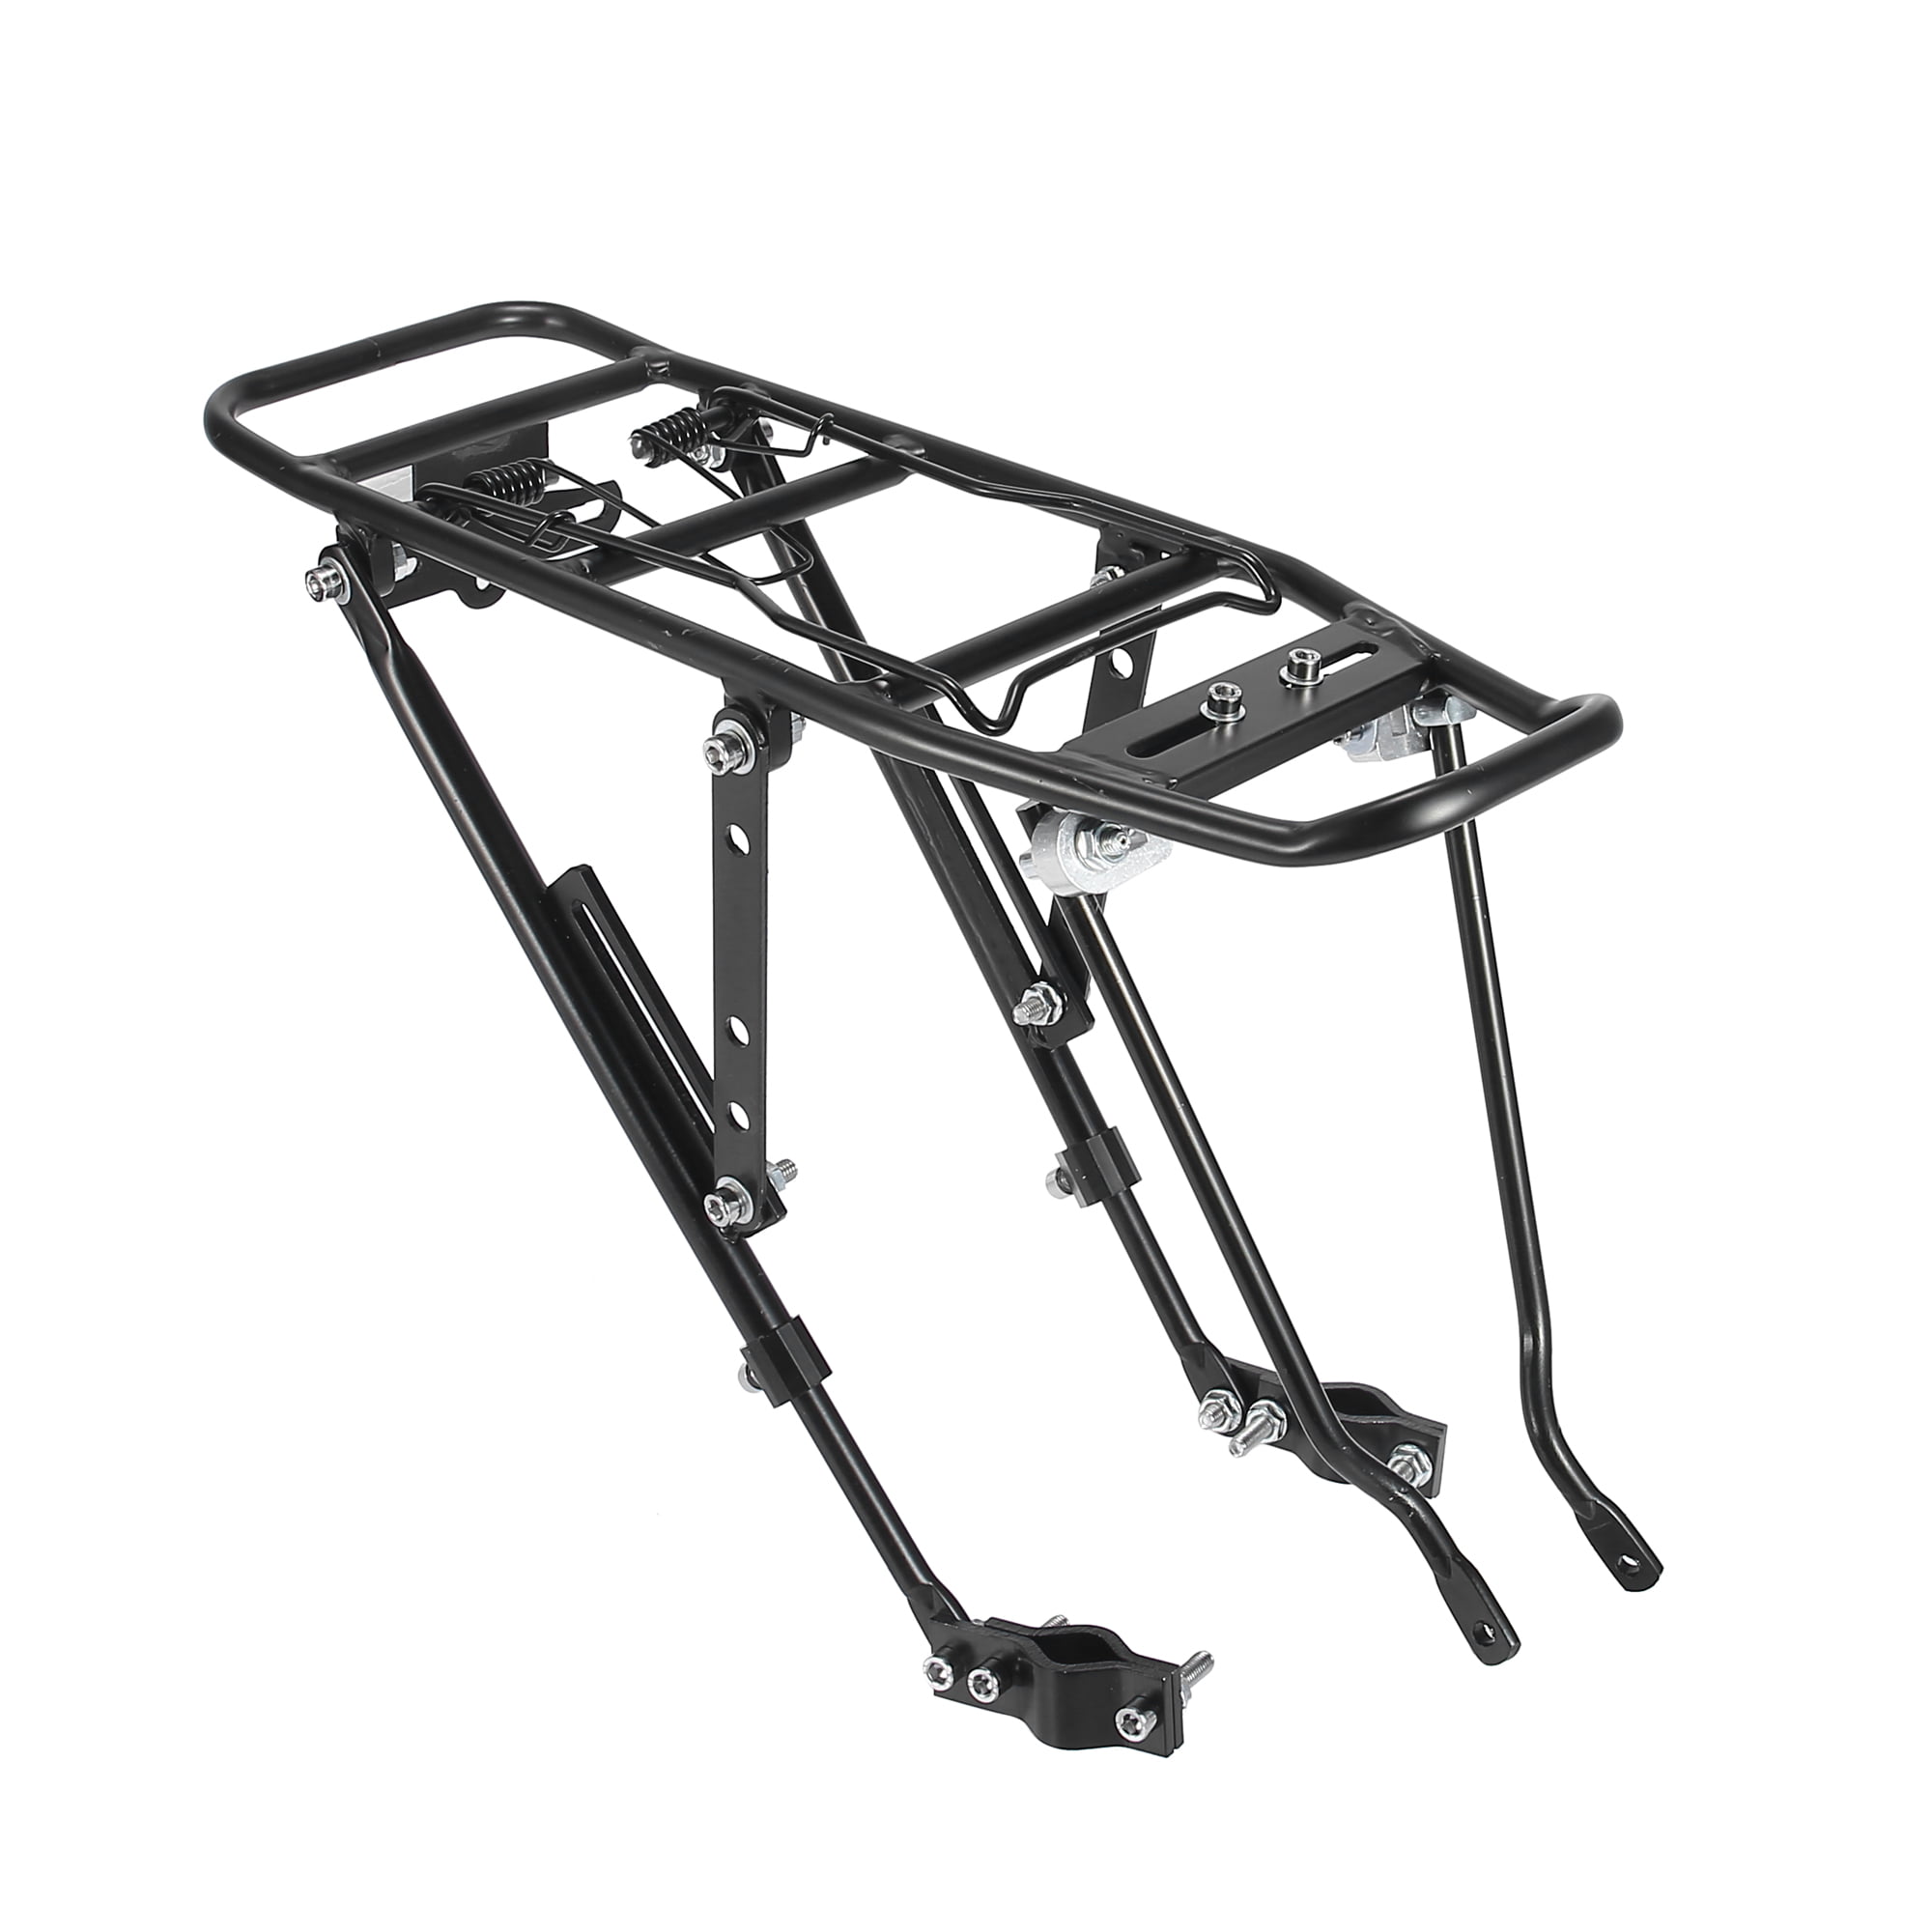 X AUTOHAUX Aluminum Alloy Adjustable Bicycle Frame Mountain Road Bike Rear Cargo Luggage Carrier Rack Kit 55 Lbs Capacity 